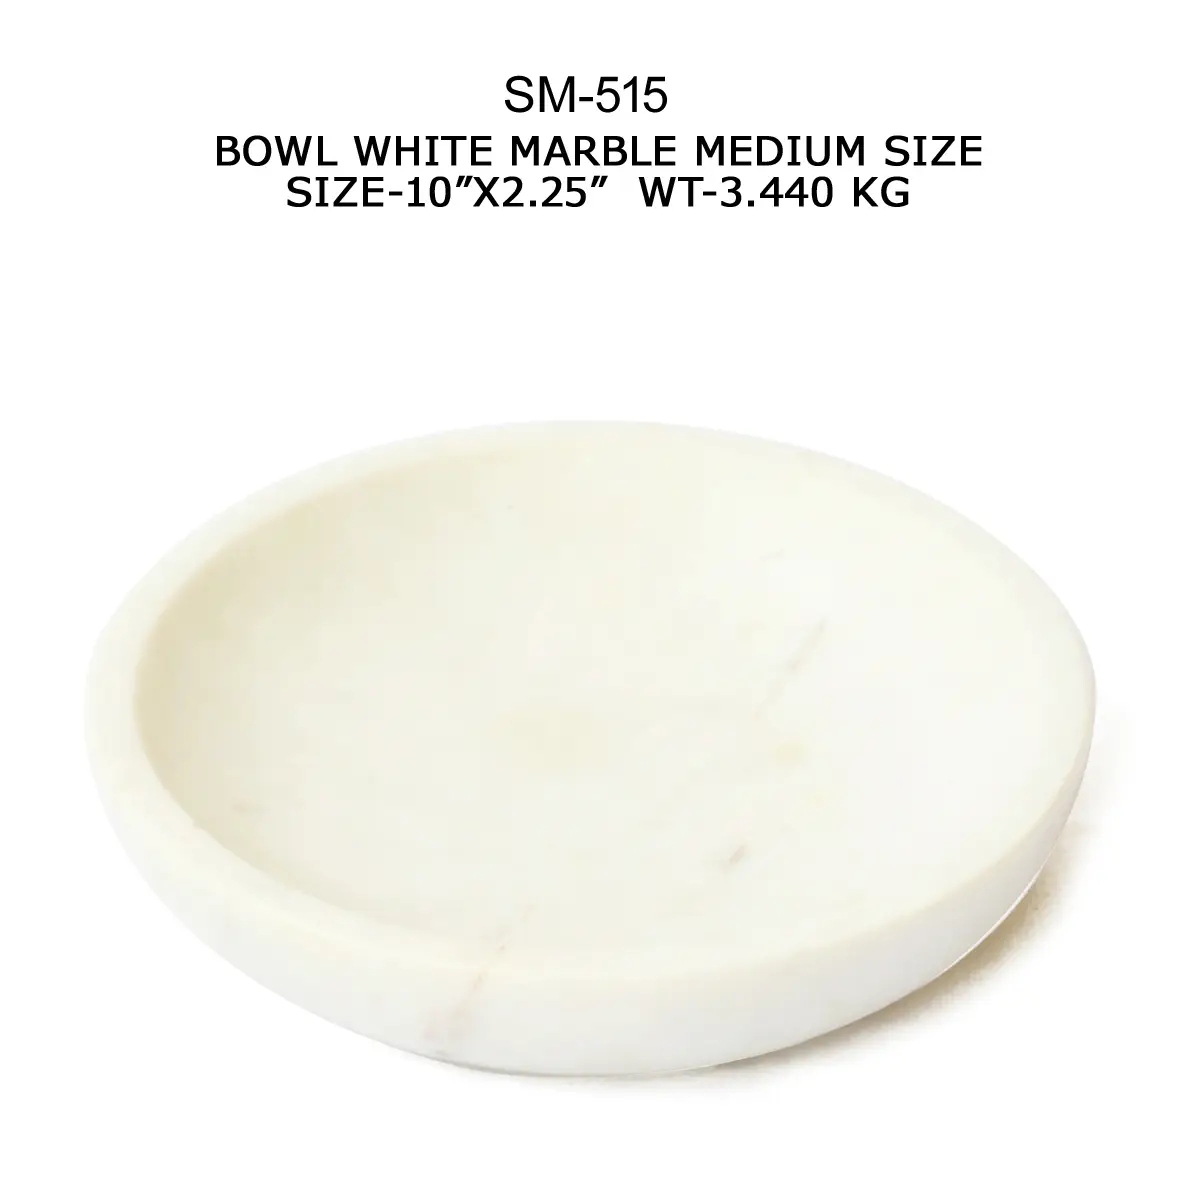 BOWL SAMPLE NO. 14 IN WHITE MARBLE IN MEDIUM
SIZE